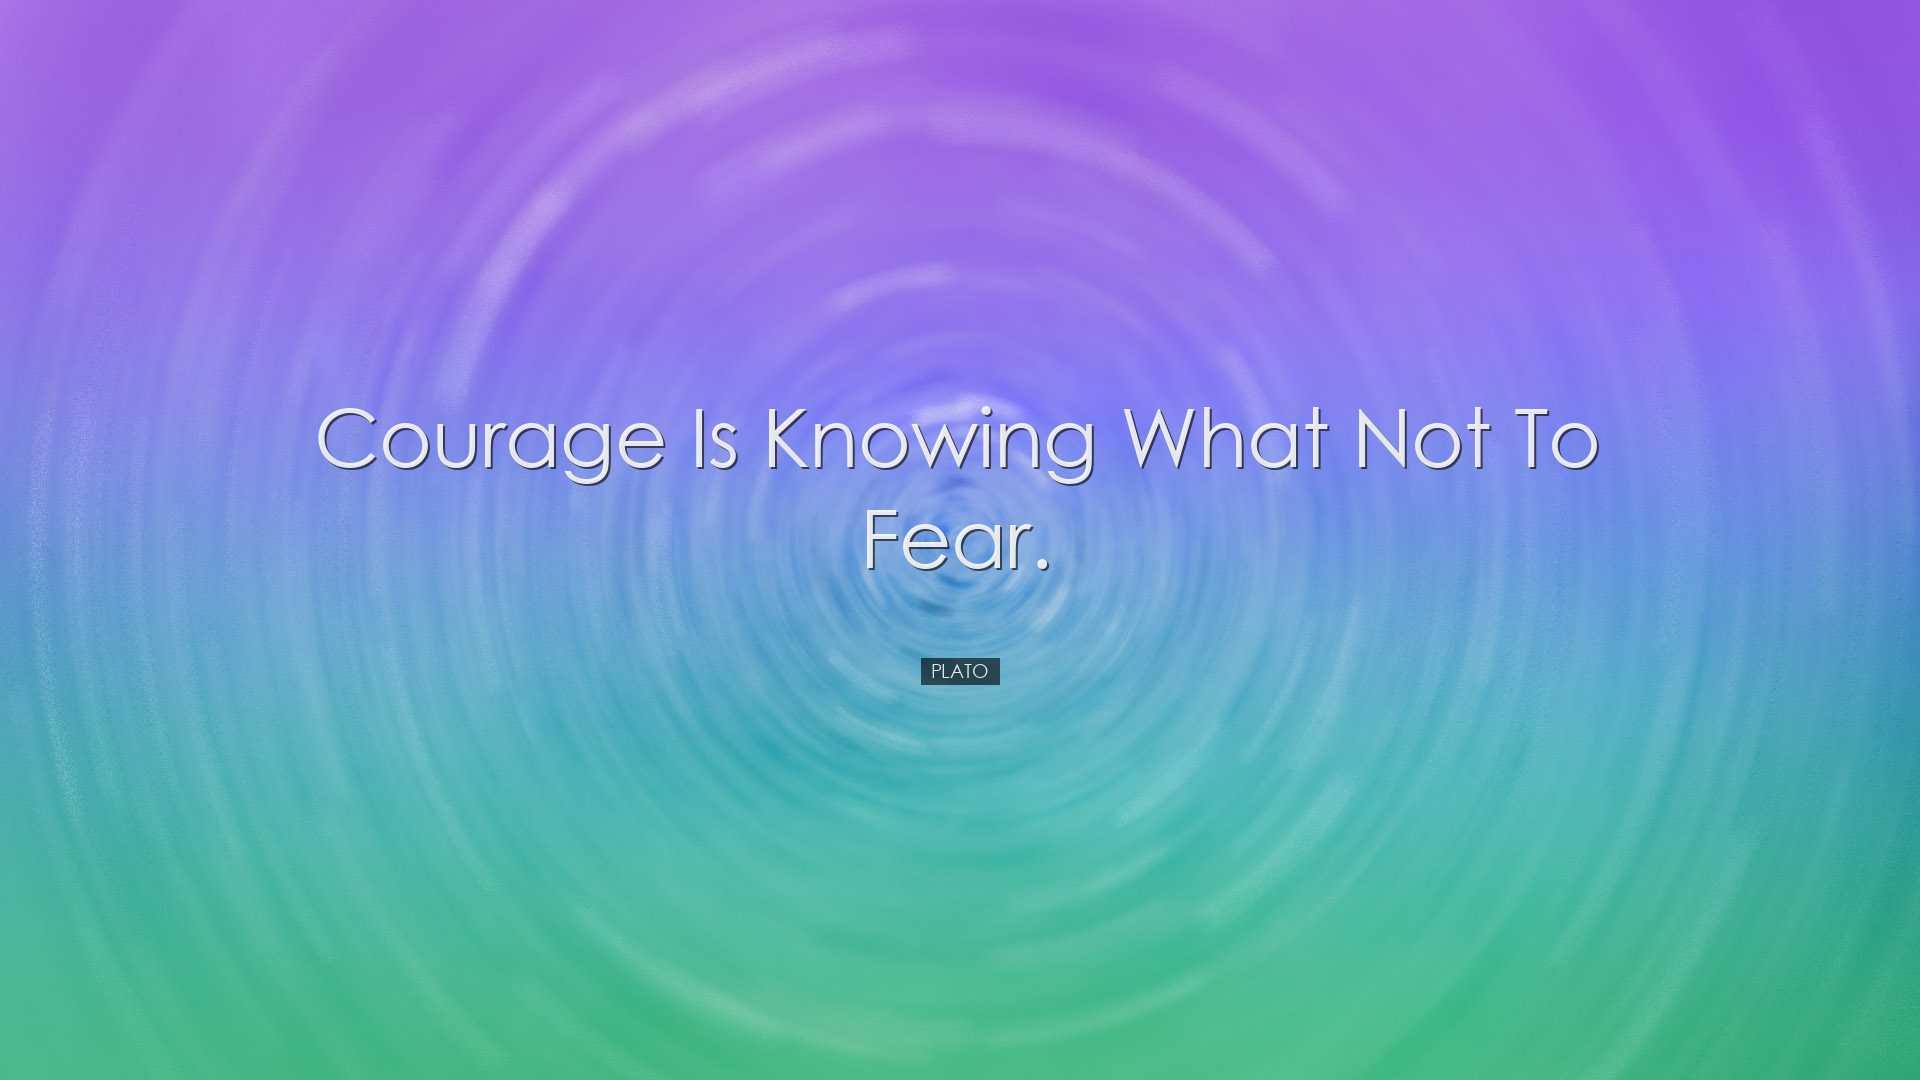 Courage is knowing what not to fear. - Plato